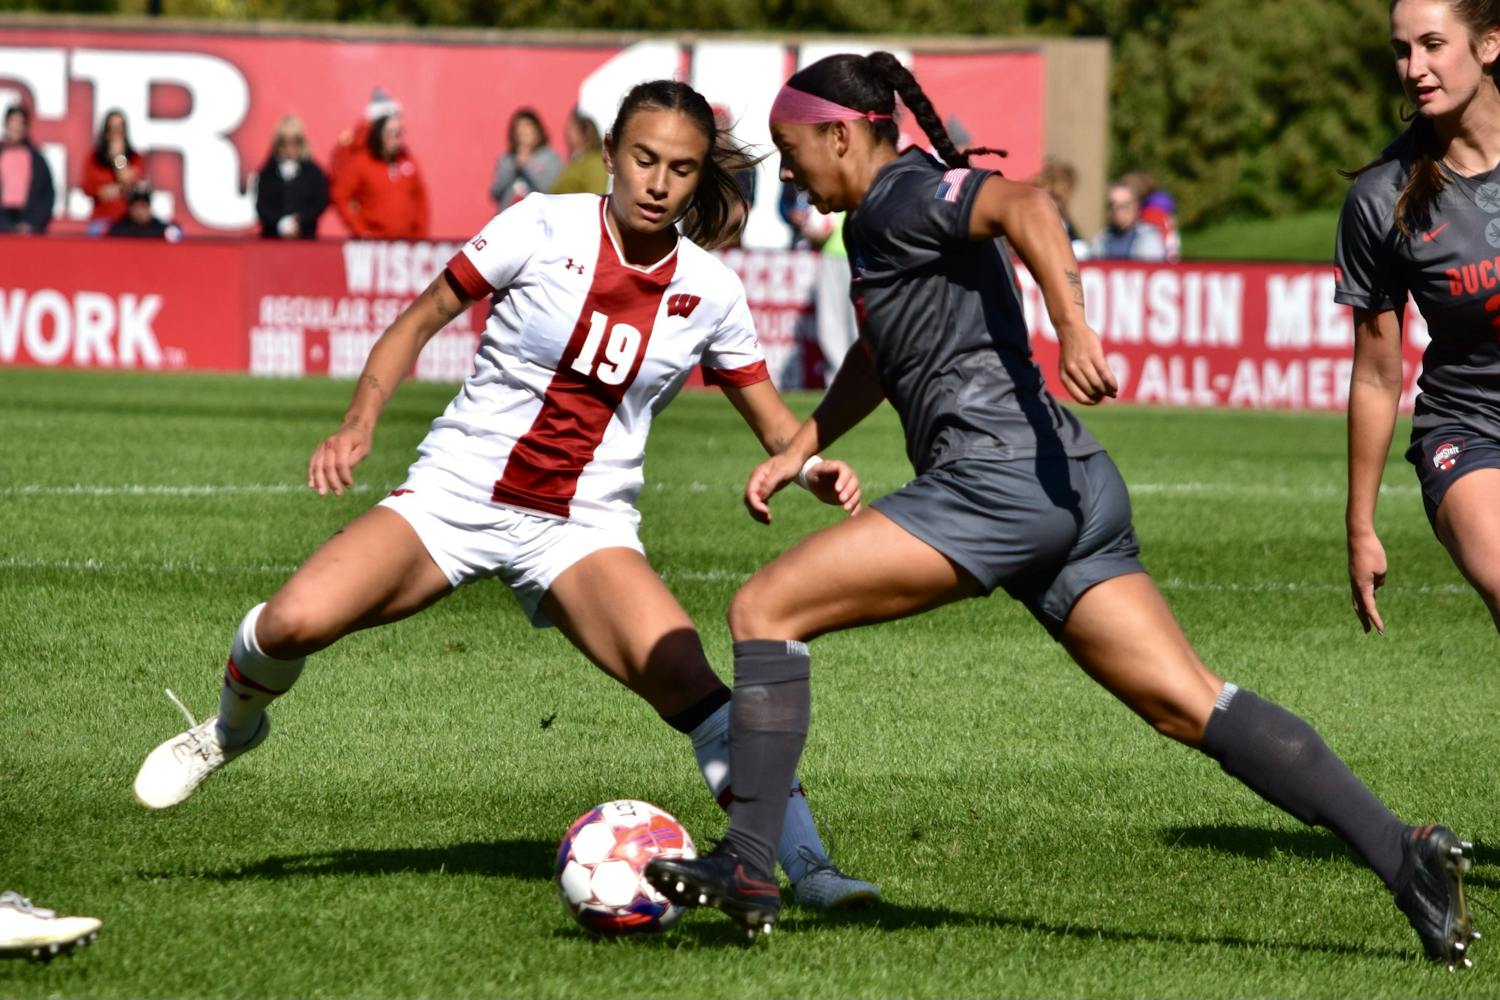 PHOTOS: Badgers Women's Soccer puts up a fight against Ohio State in challenging defeat, 1-0